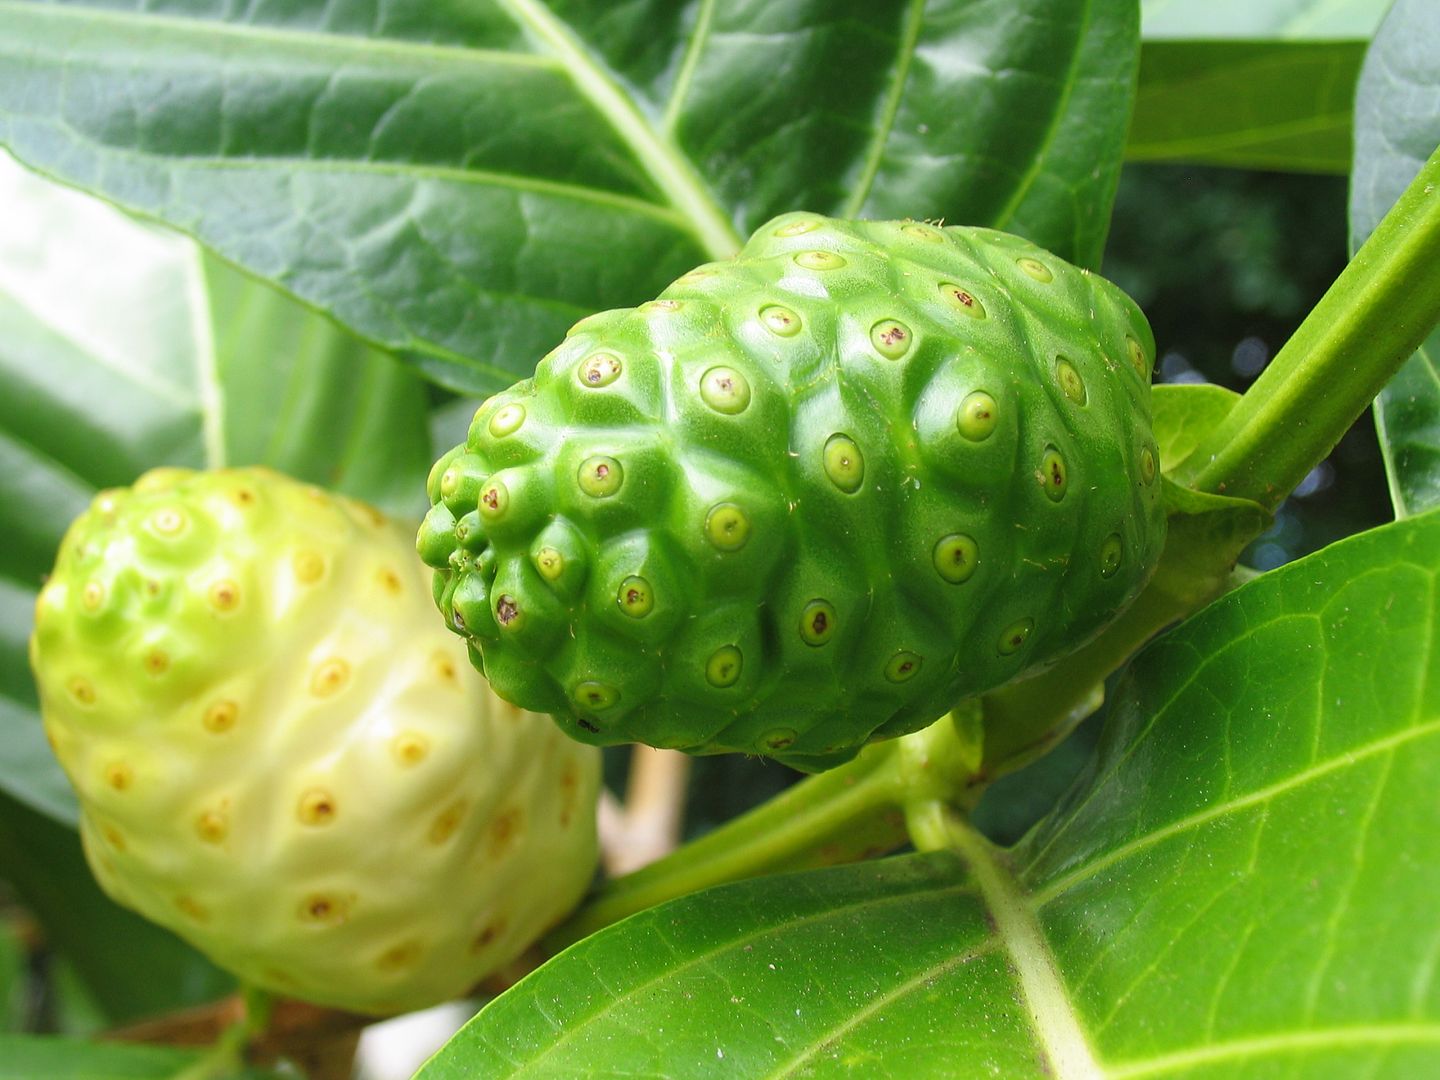 Tahitian Noni Fruit is a small greenish white tropical fruit about the size of a potato.